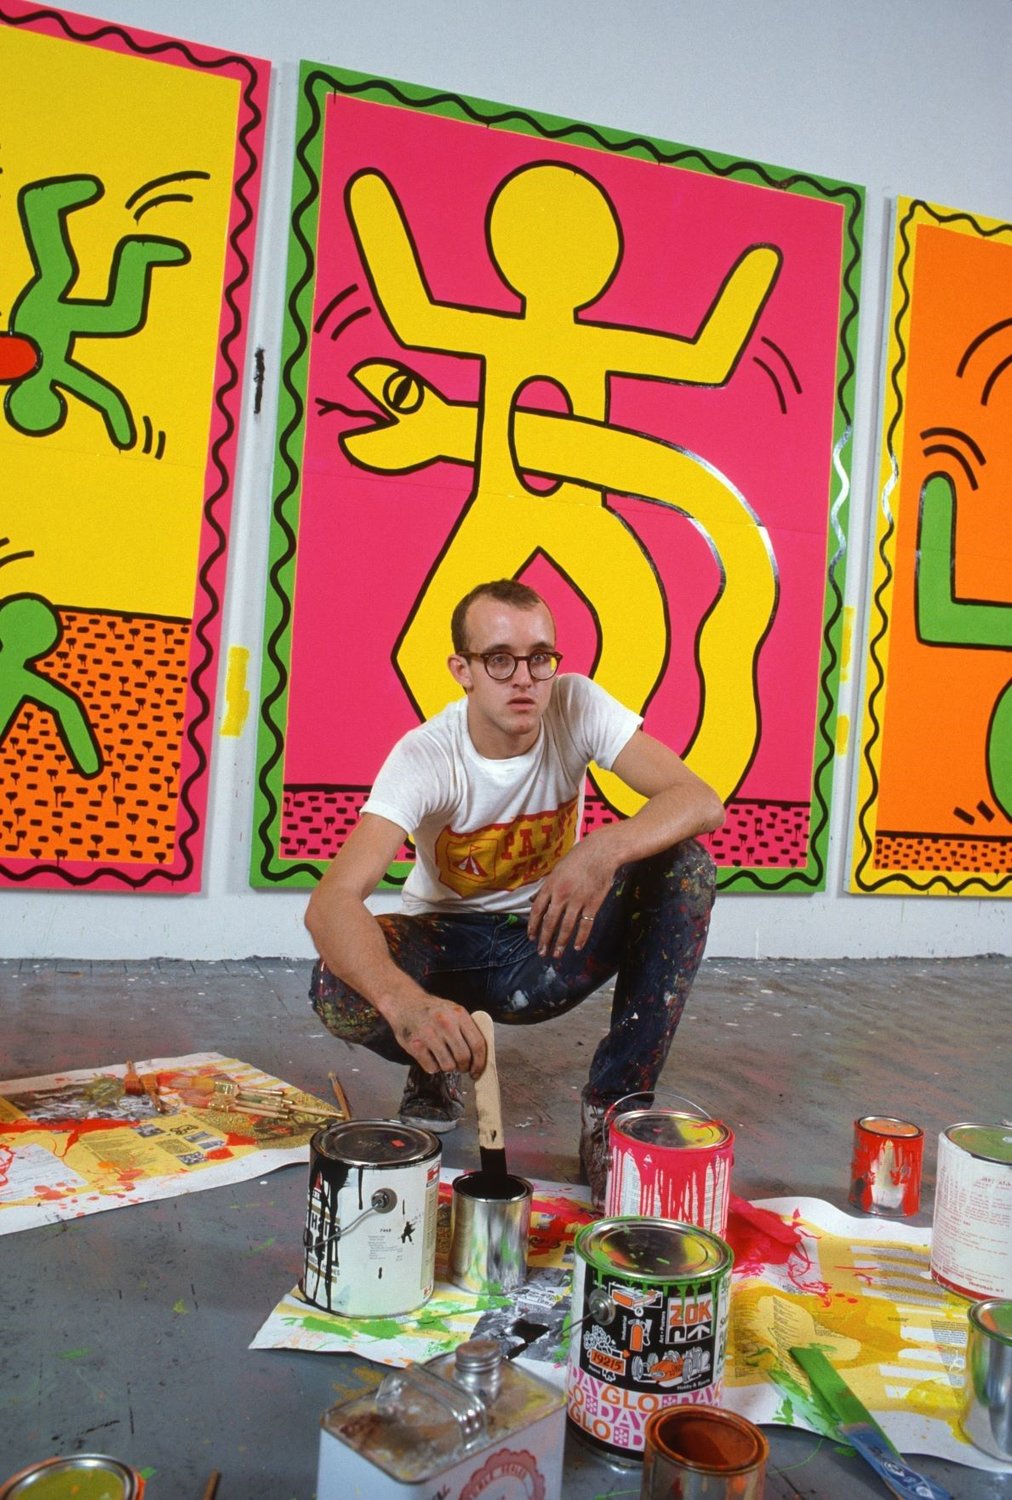 Keith Haring (1958-1990), at work, with some of his recognizable creations behind him.